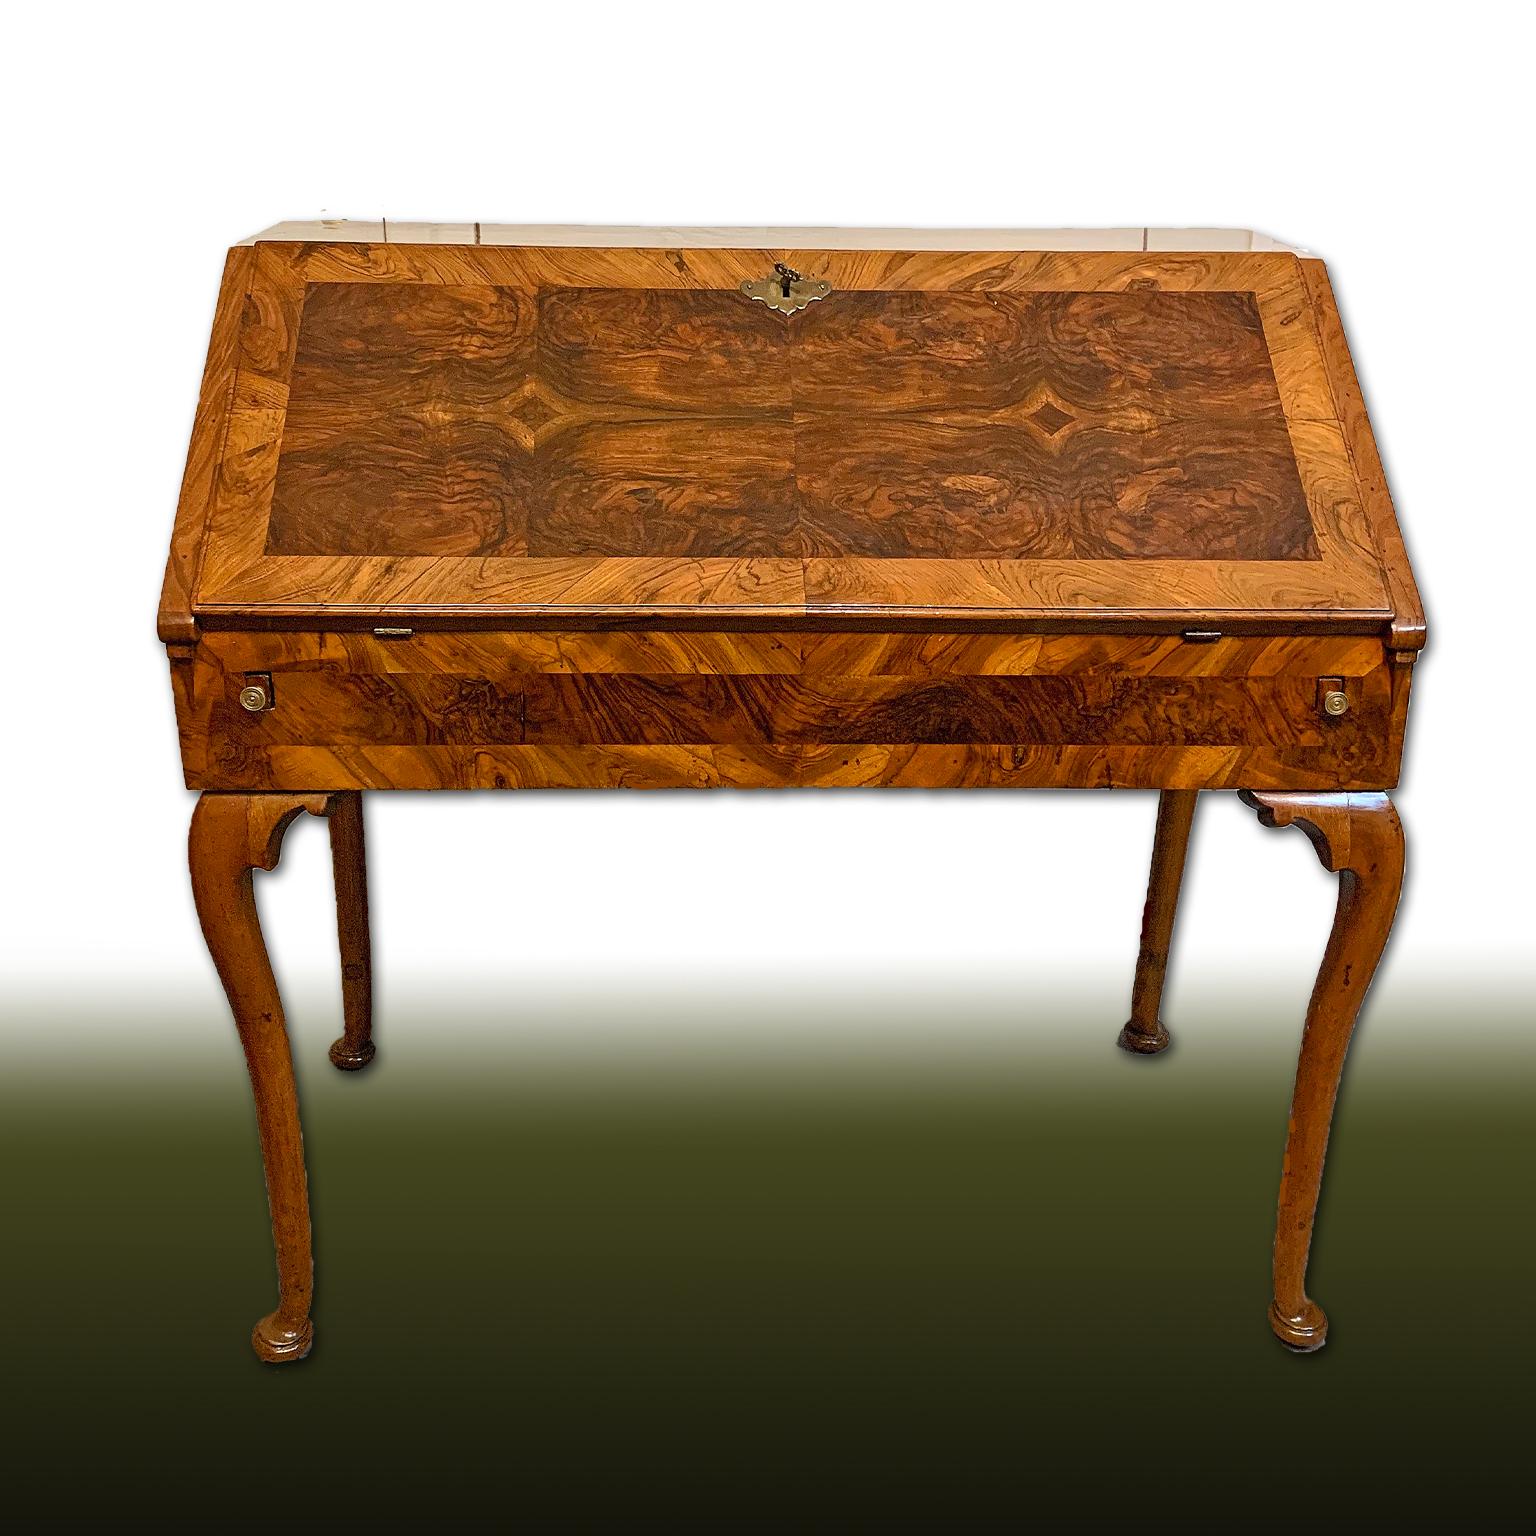 Elegant writing desk with walnut veneered drop-leaf top with solid wood parts. Particular for the contained dimensions and the wavy legs on a linear upper body. The possibility of using it as a foot desk is pleasant thanks to a small frame to